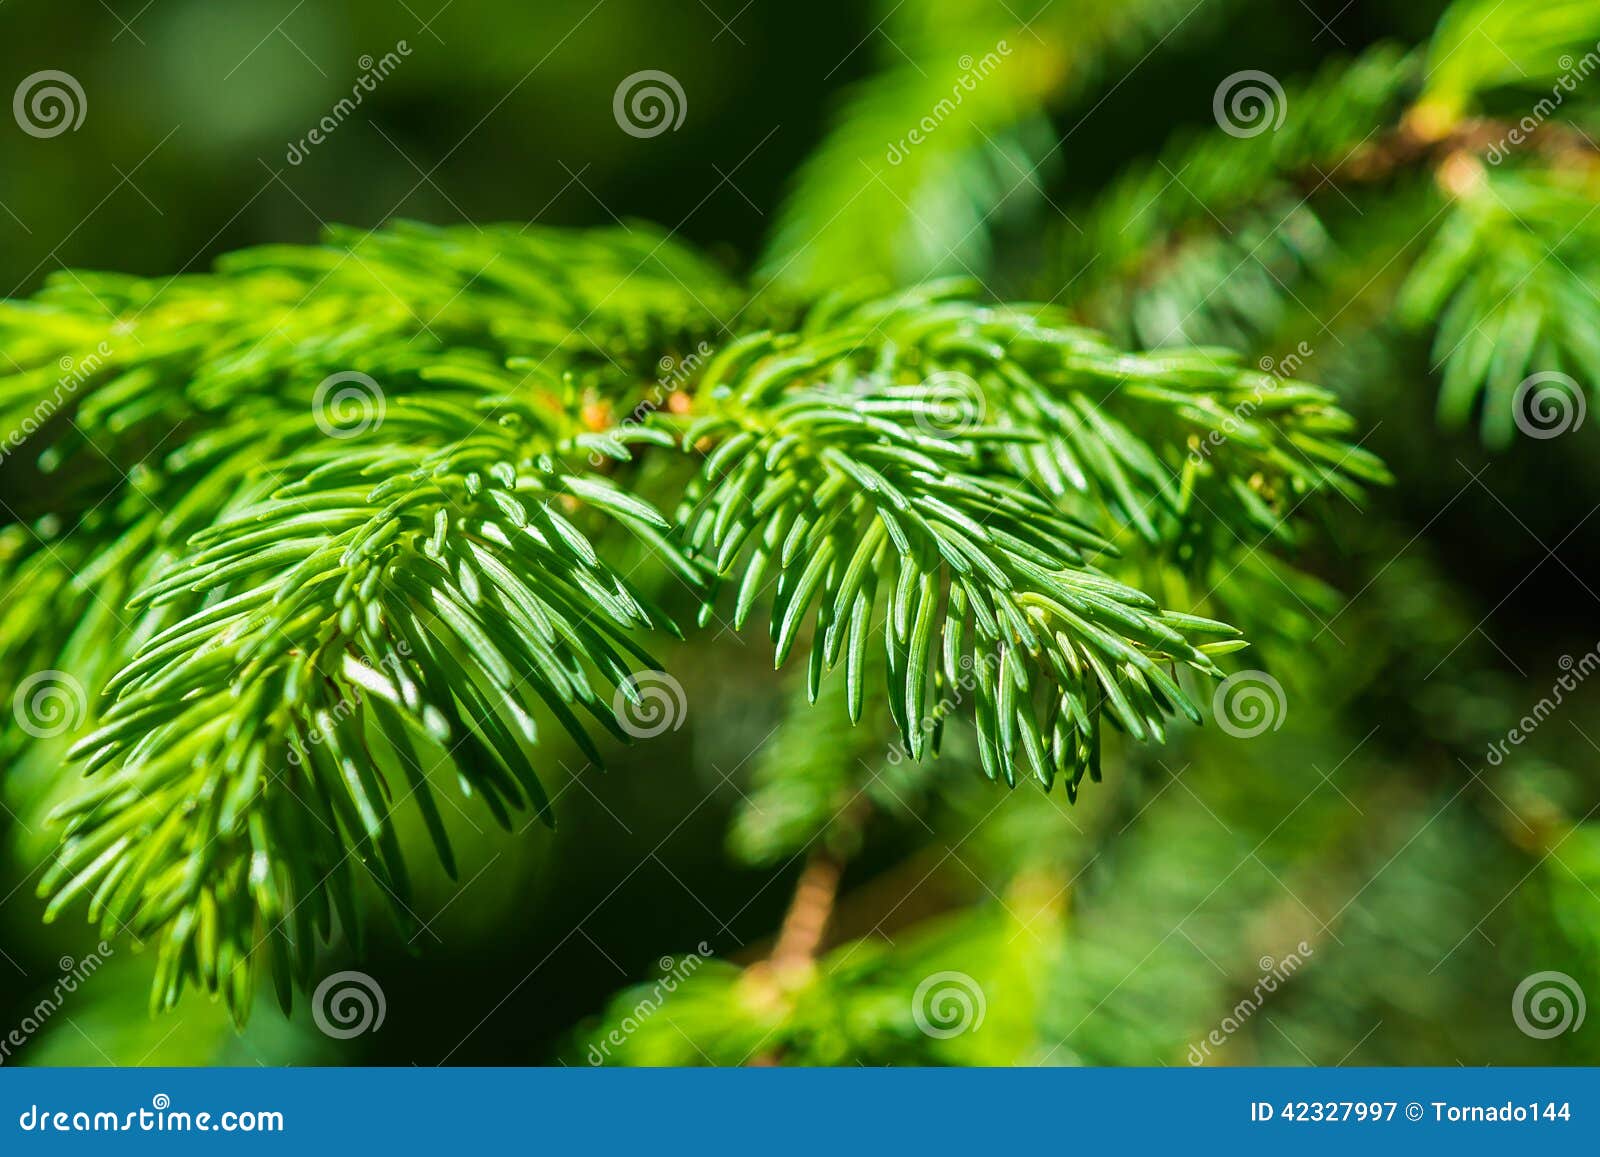 Green Branch And Needles Of A Spruce Tree Stock Photo - Image: 42327997